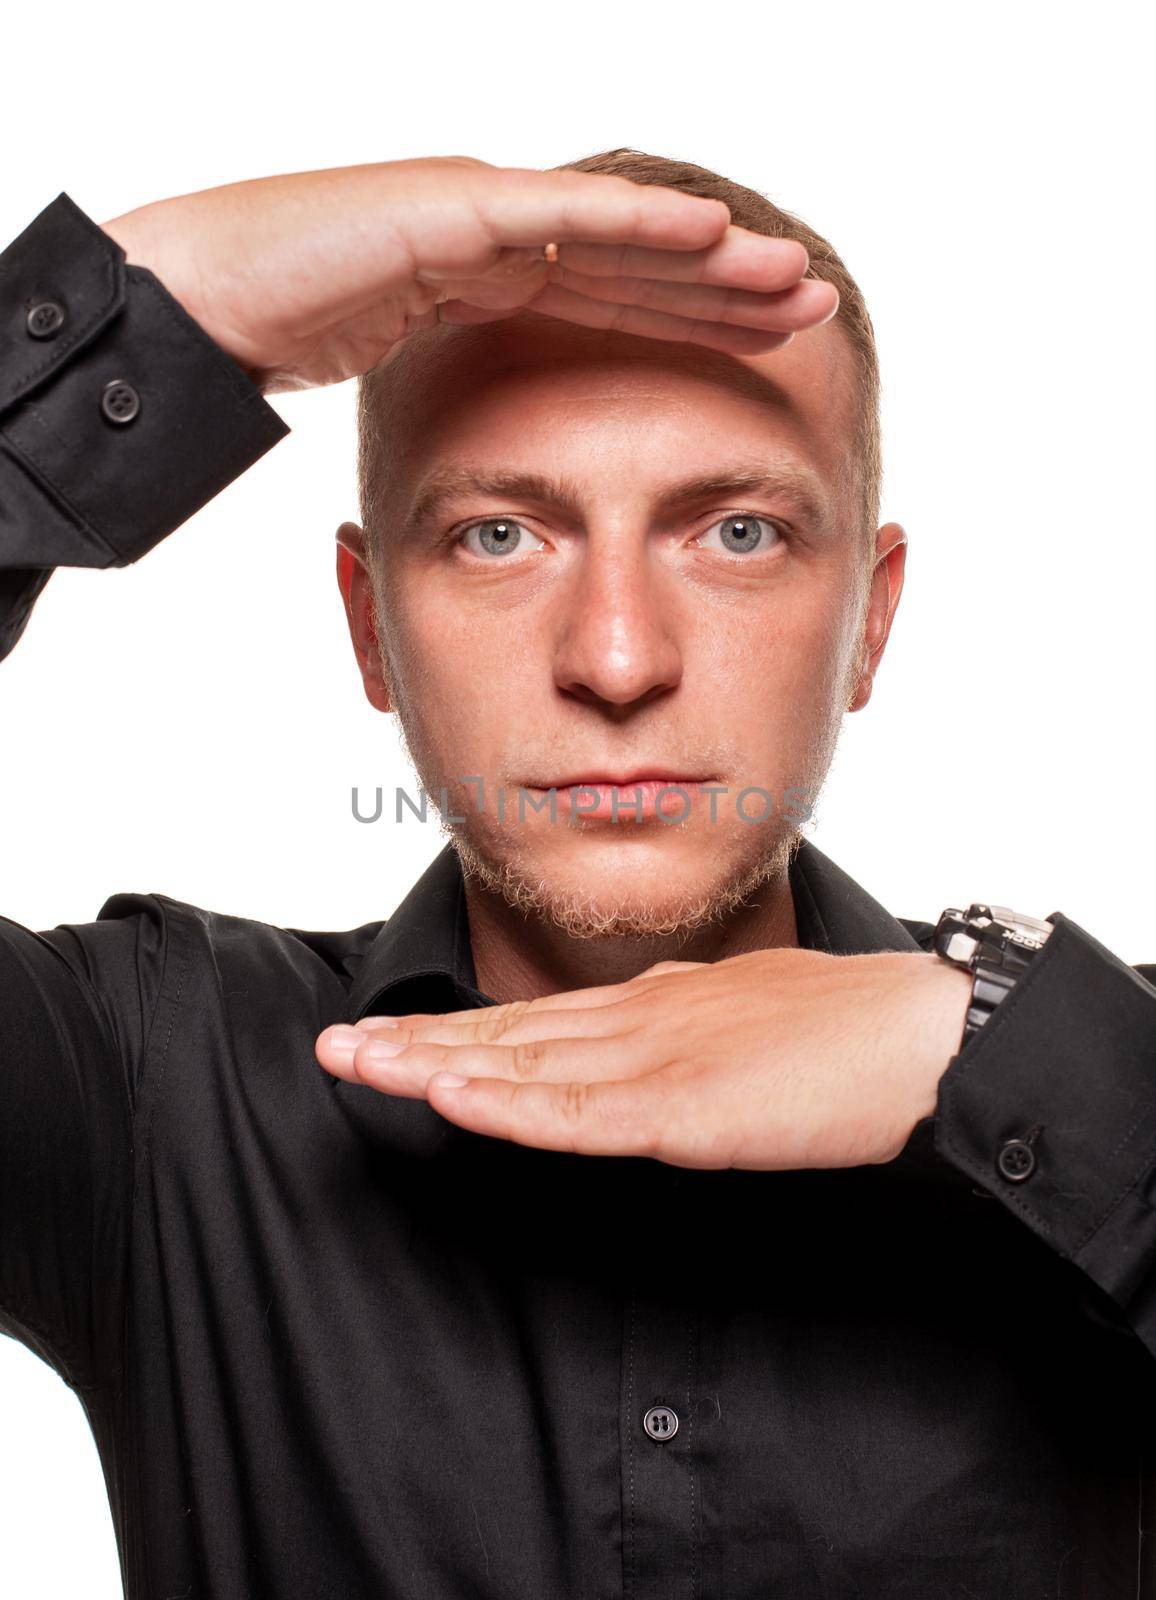 Handsome young blond man in a black shirt is making faces and looking at the camera through his hands, isolated on a white background